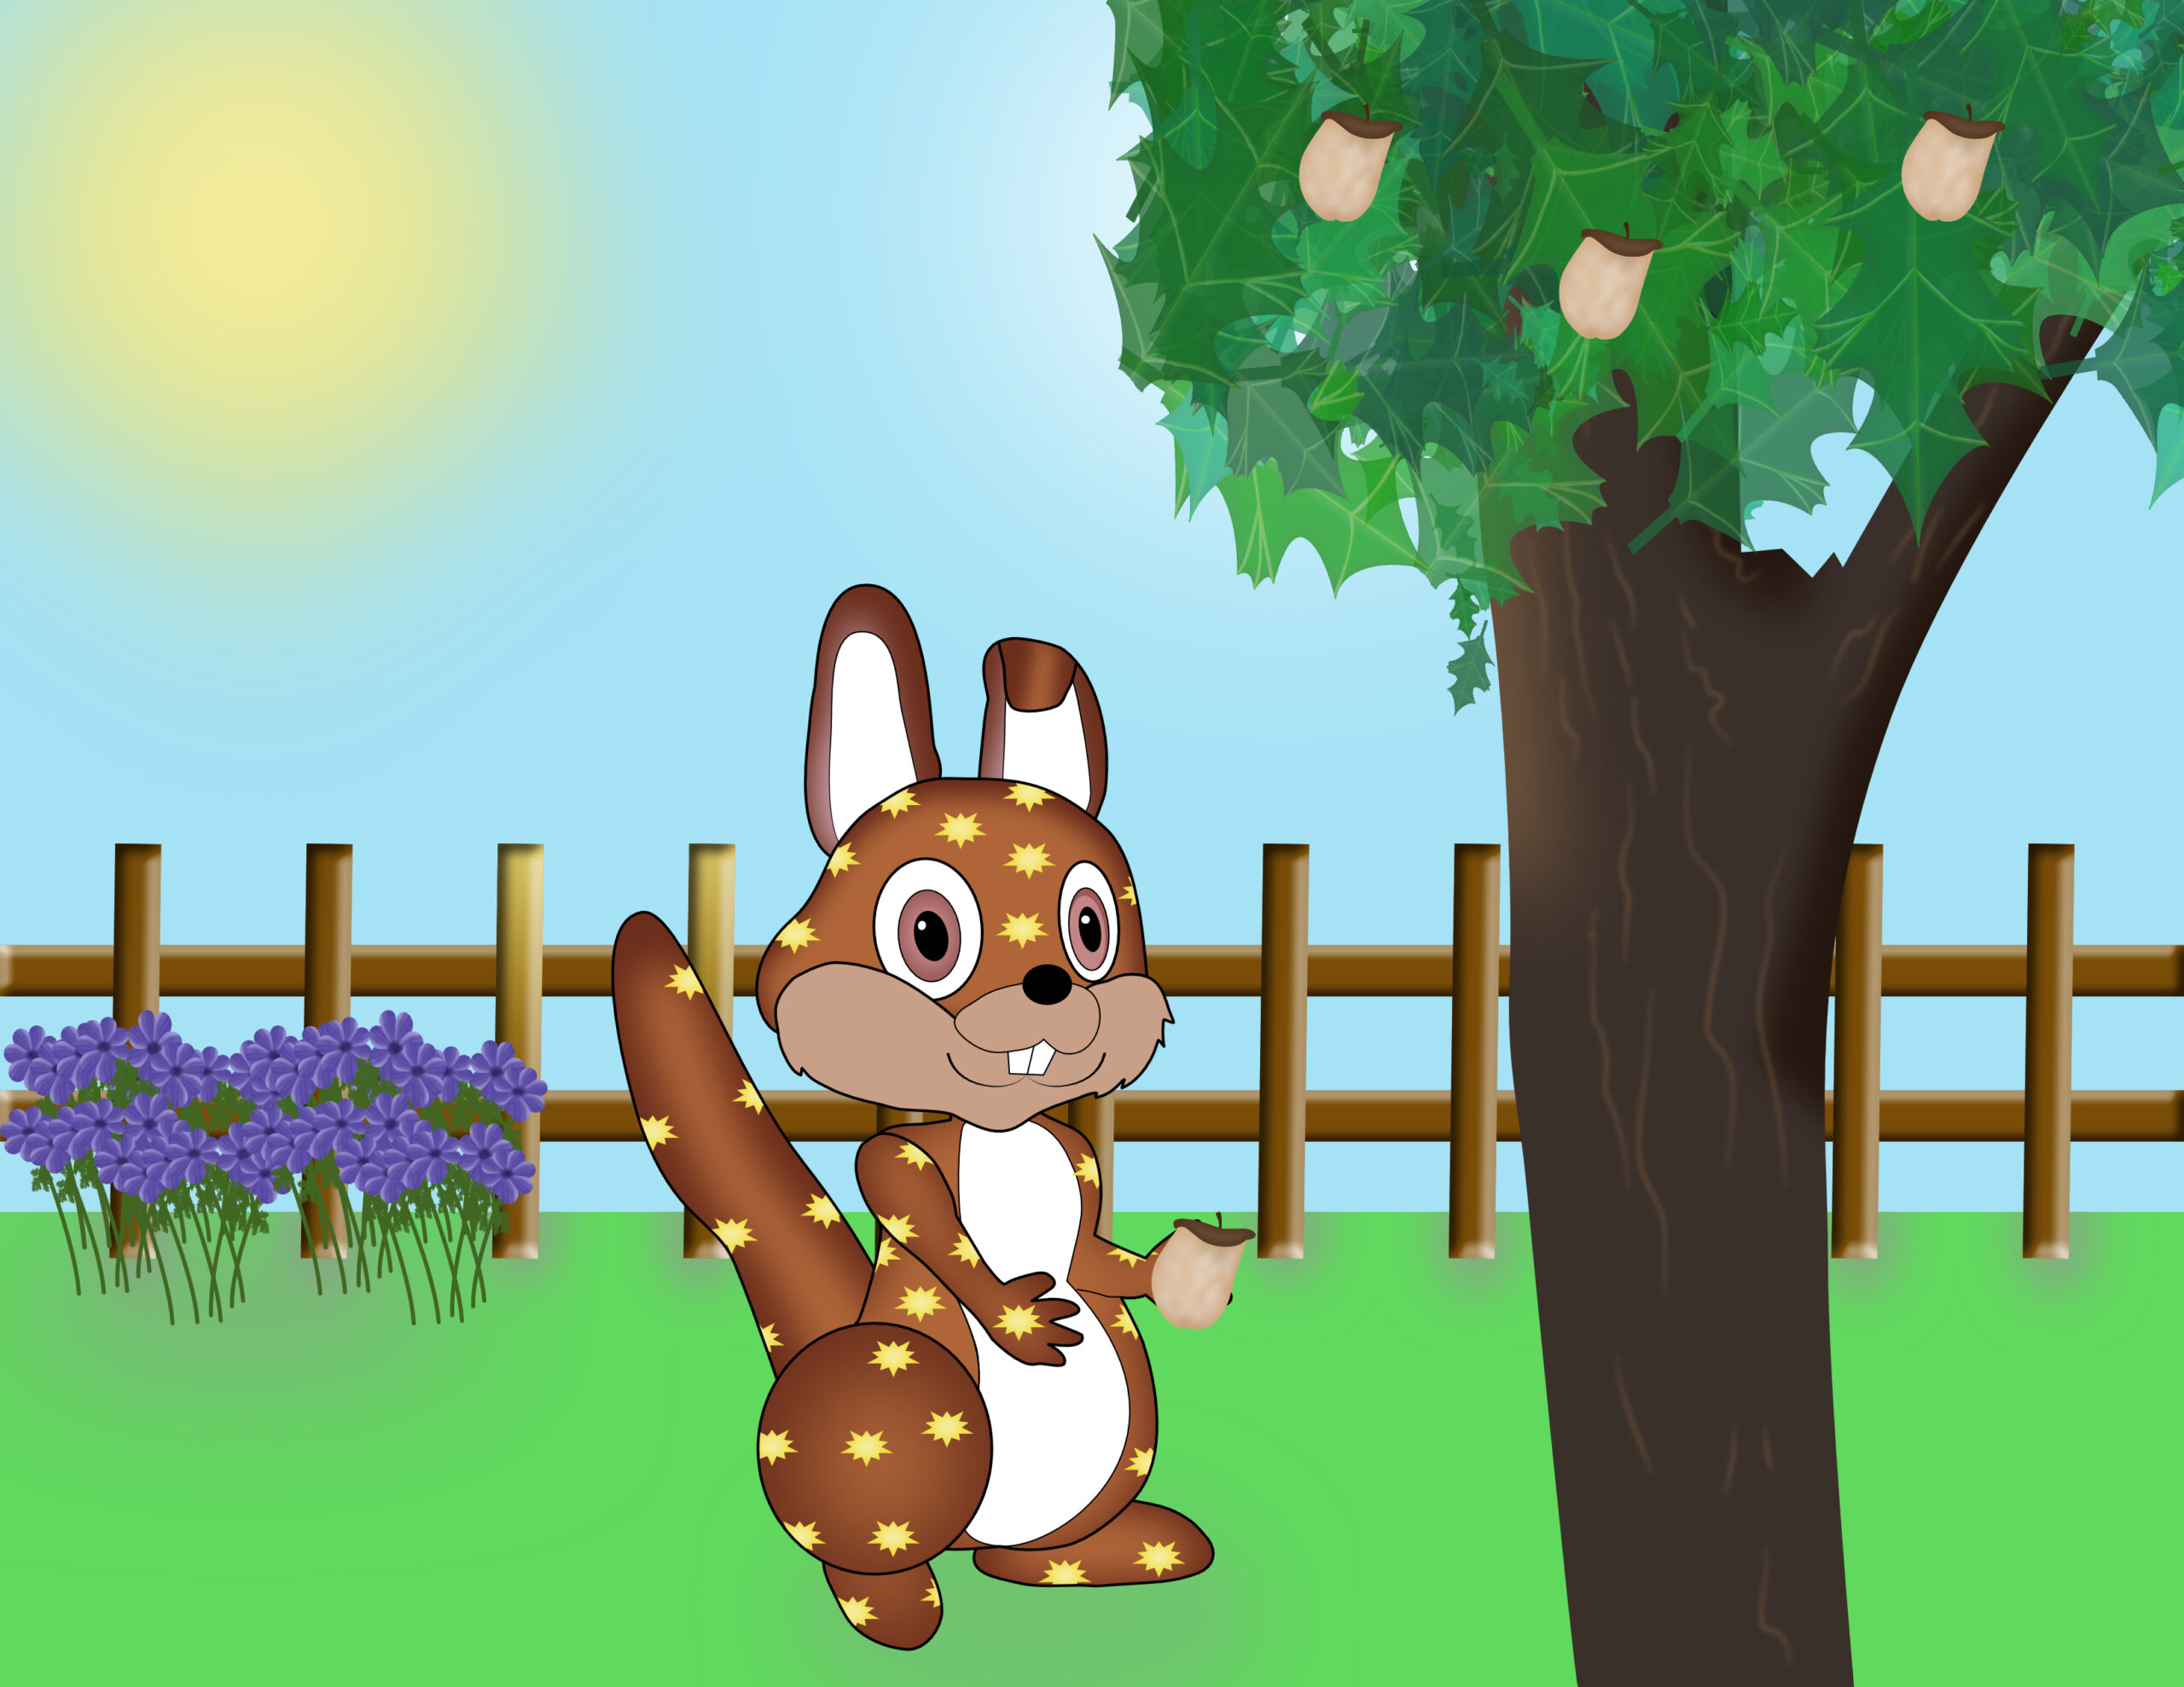 Sunny Squirrel – Character Insight